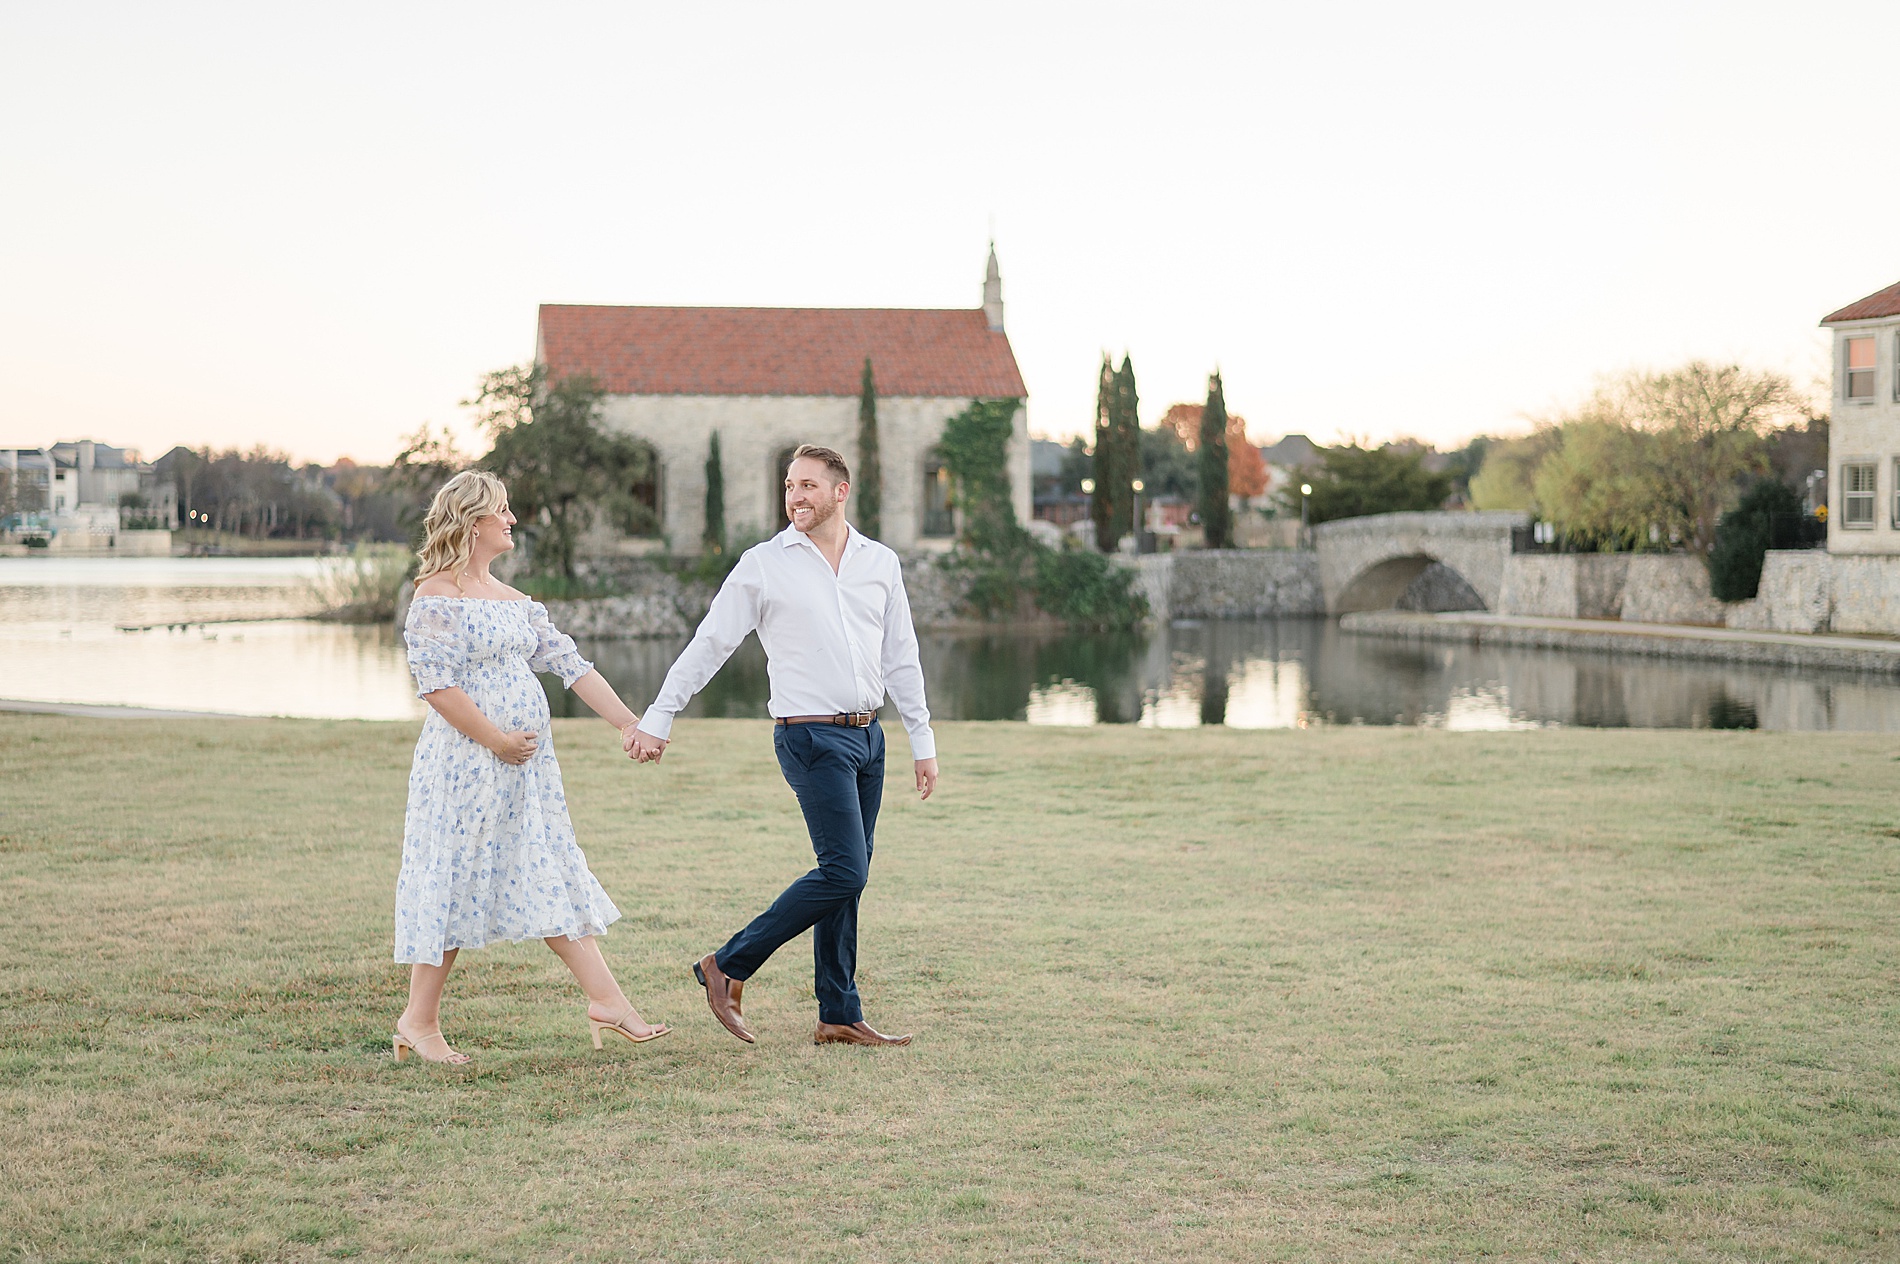 couple walk across field by lake during maternity session photographed by Lindsey Dutton Photography, a Dallas Family photographer
